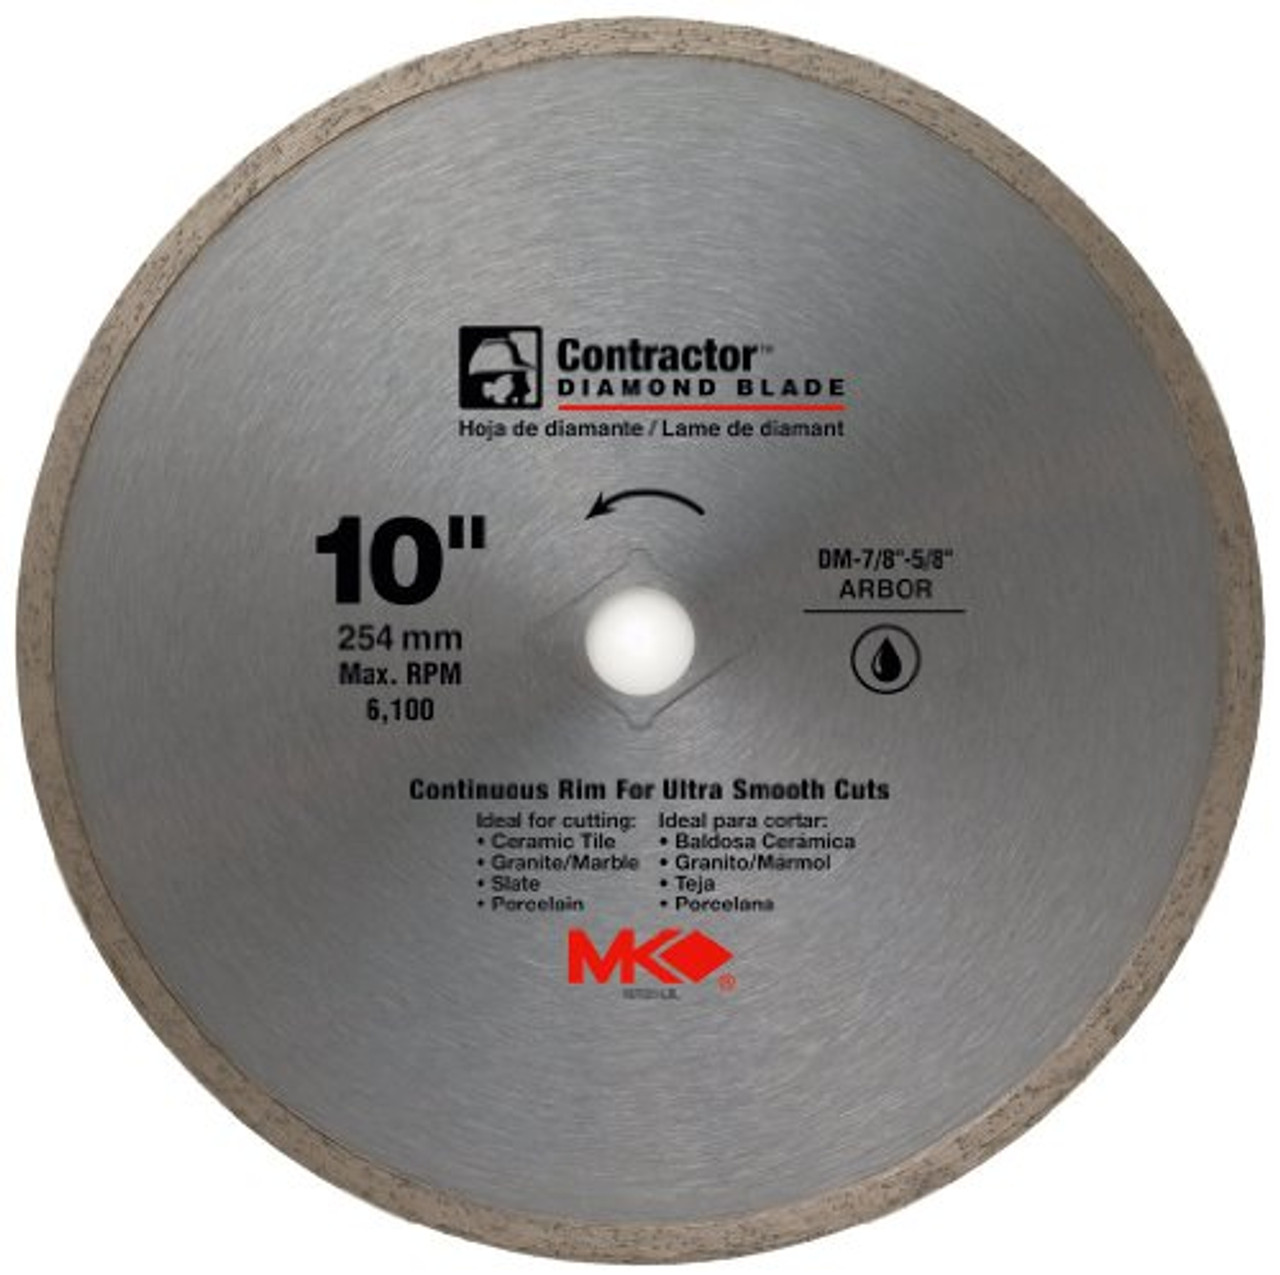 MK Diamond 167031 10" x 5/8" Contractor Quality Wet Cutting Continuous Rim Diamond Blade for Tile / Marble